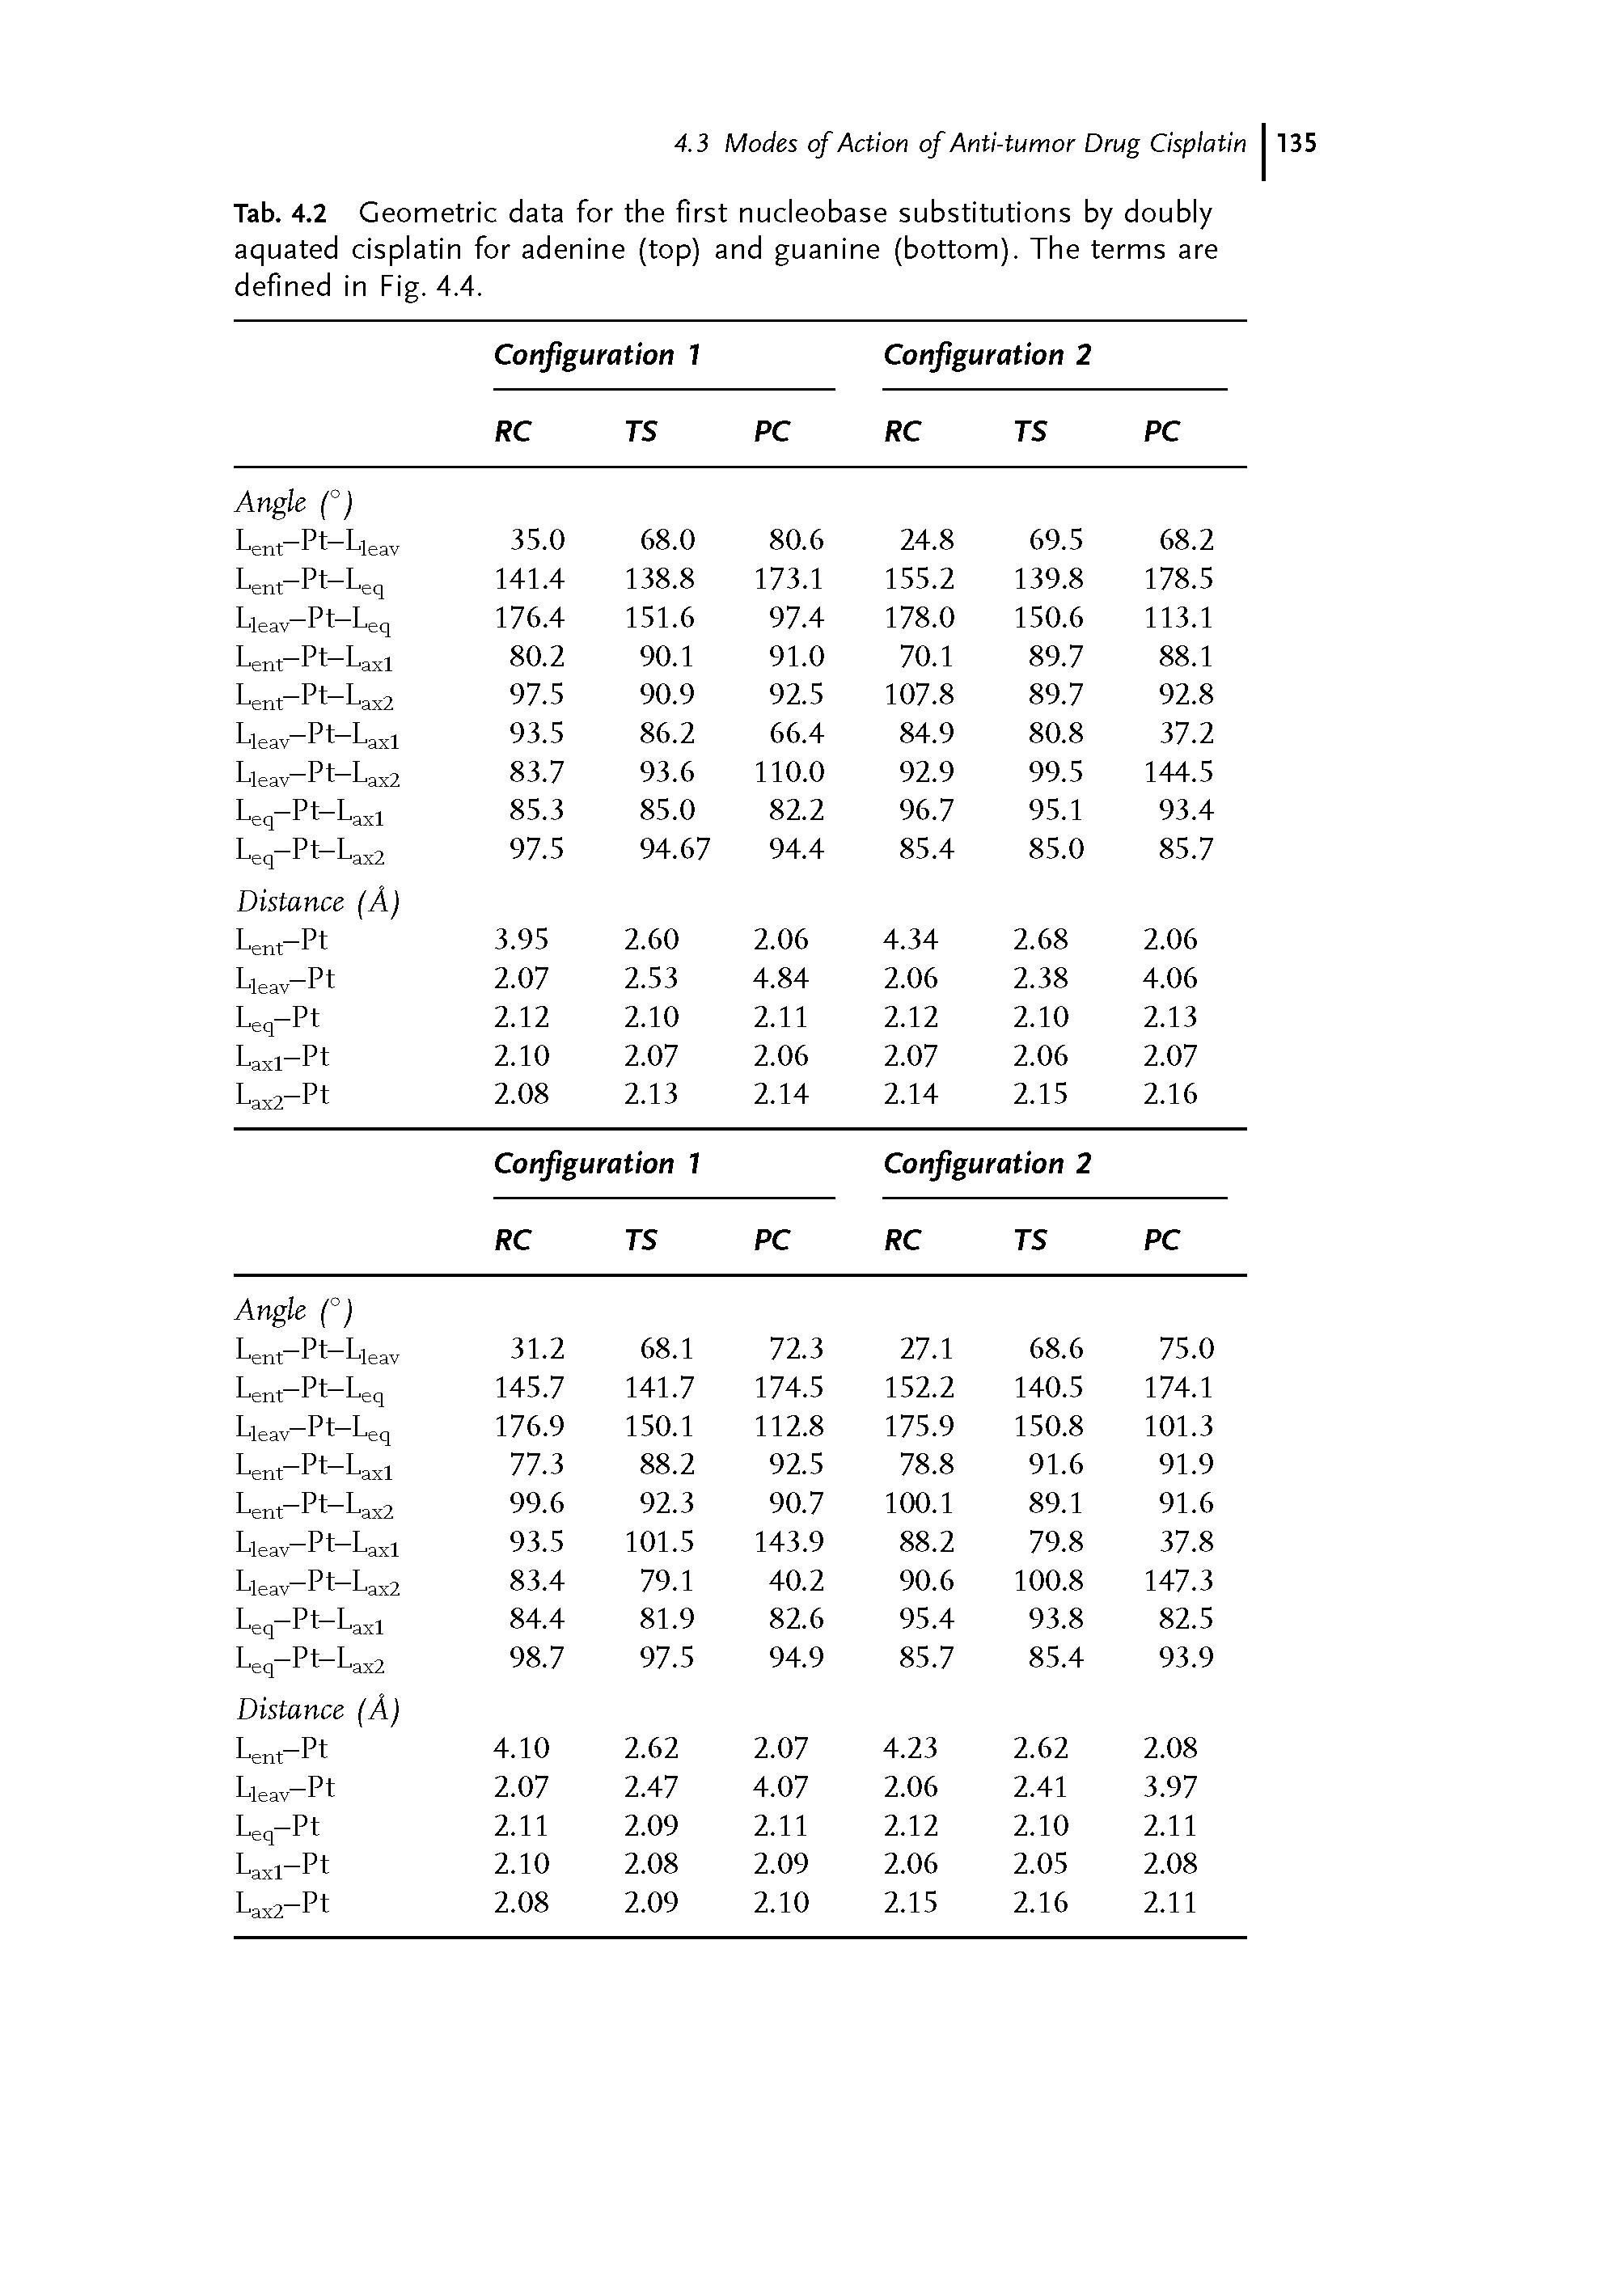 Tab. 4.2 Geometric data for the first nucleobase substitutions by doubly aquated cispiatin for adenine (top) and guanine (bottom). The terms are defined in Fig. 4.4.